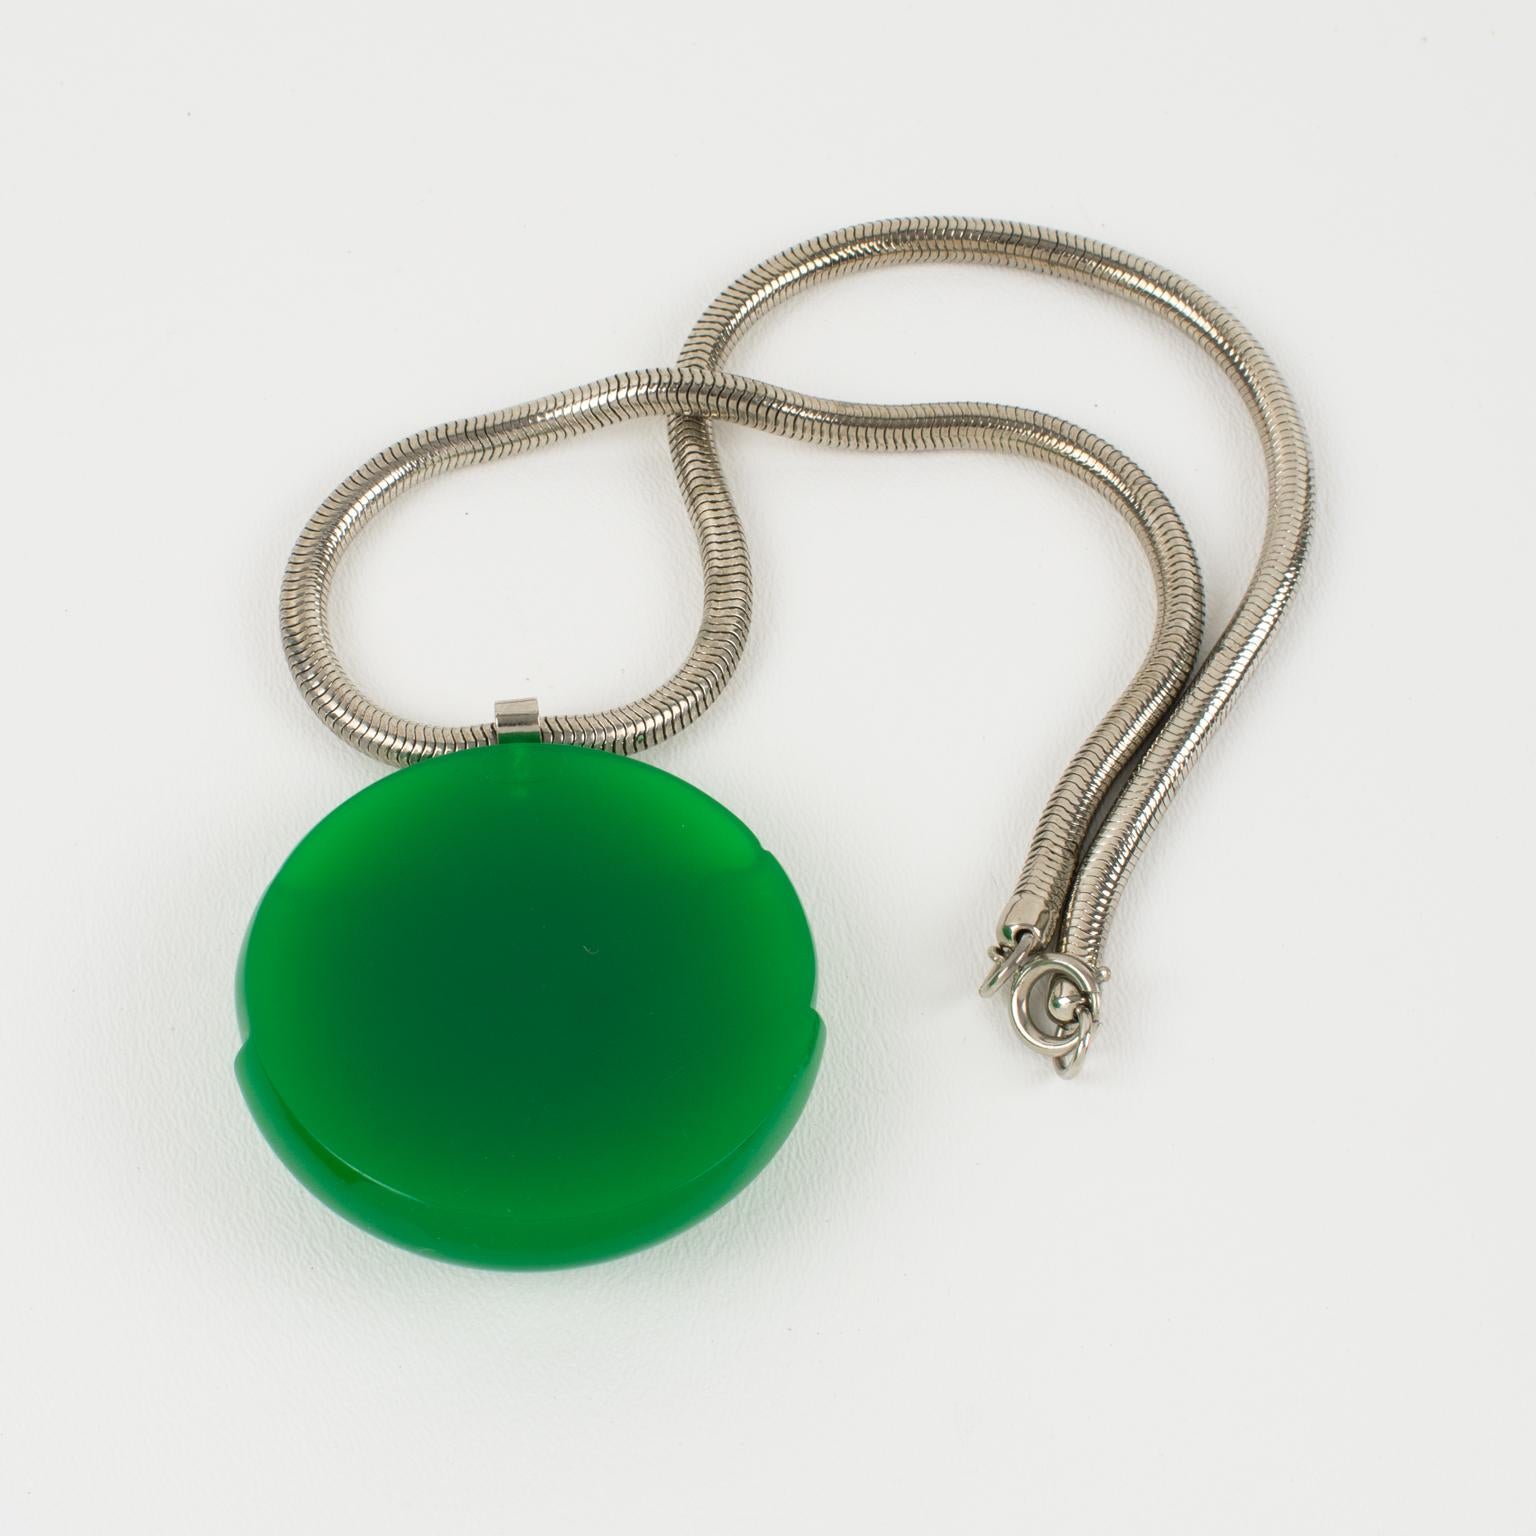 Lanvin Paris Modernist Green Lucite Medallion Necklace with Snake Chain, 1970s 3